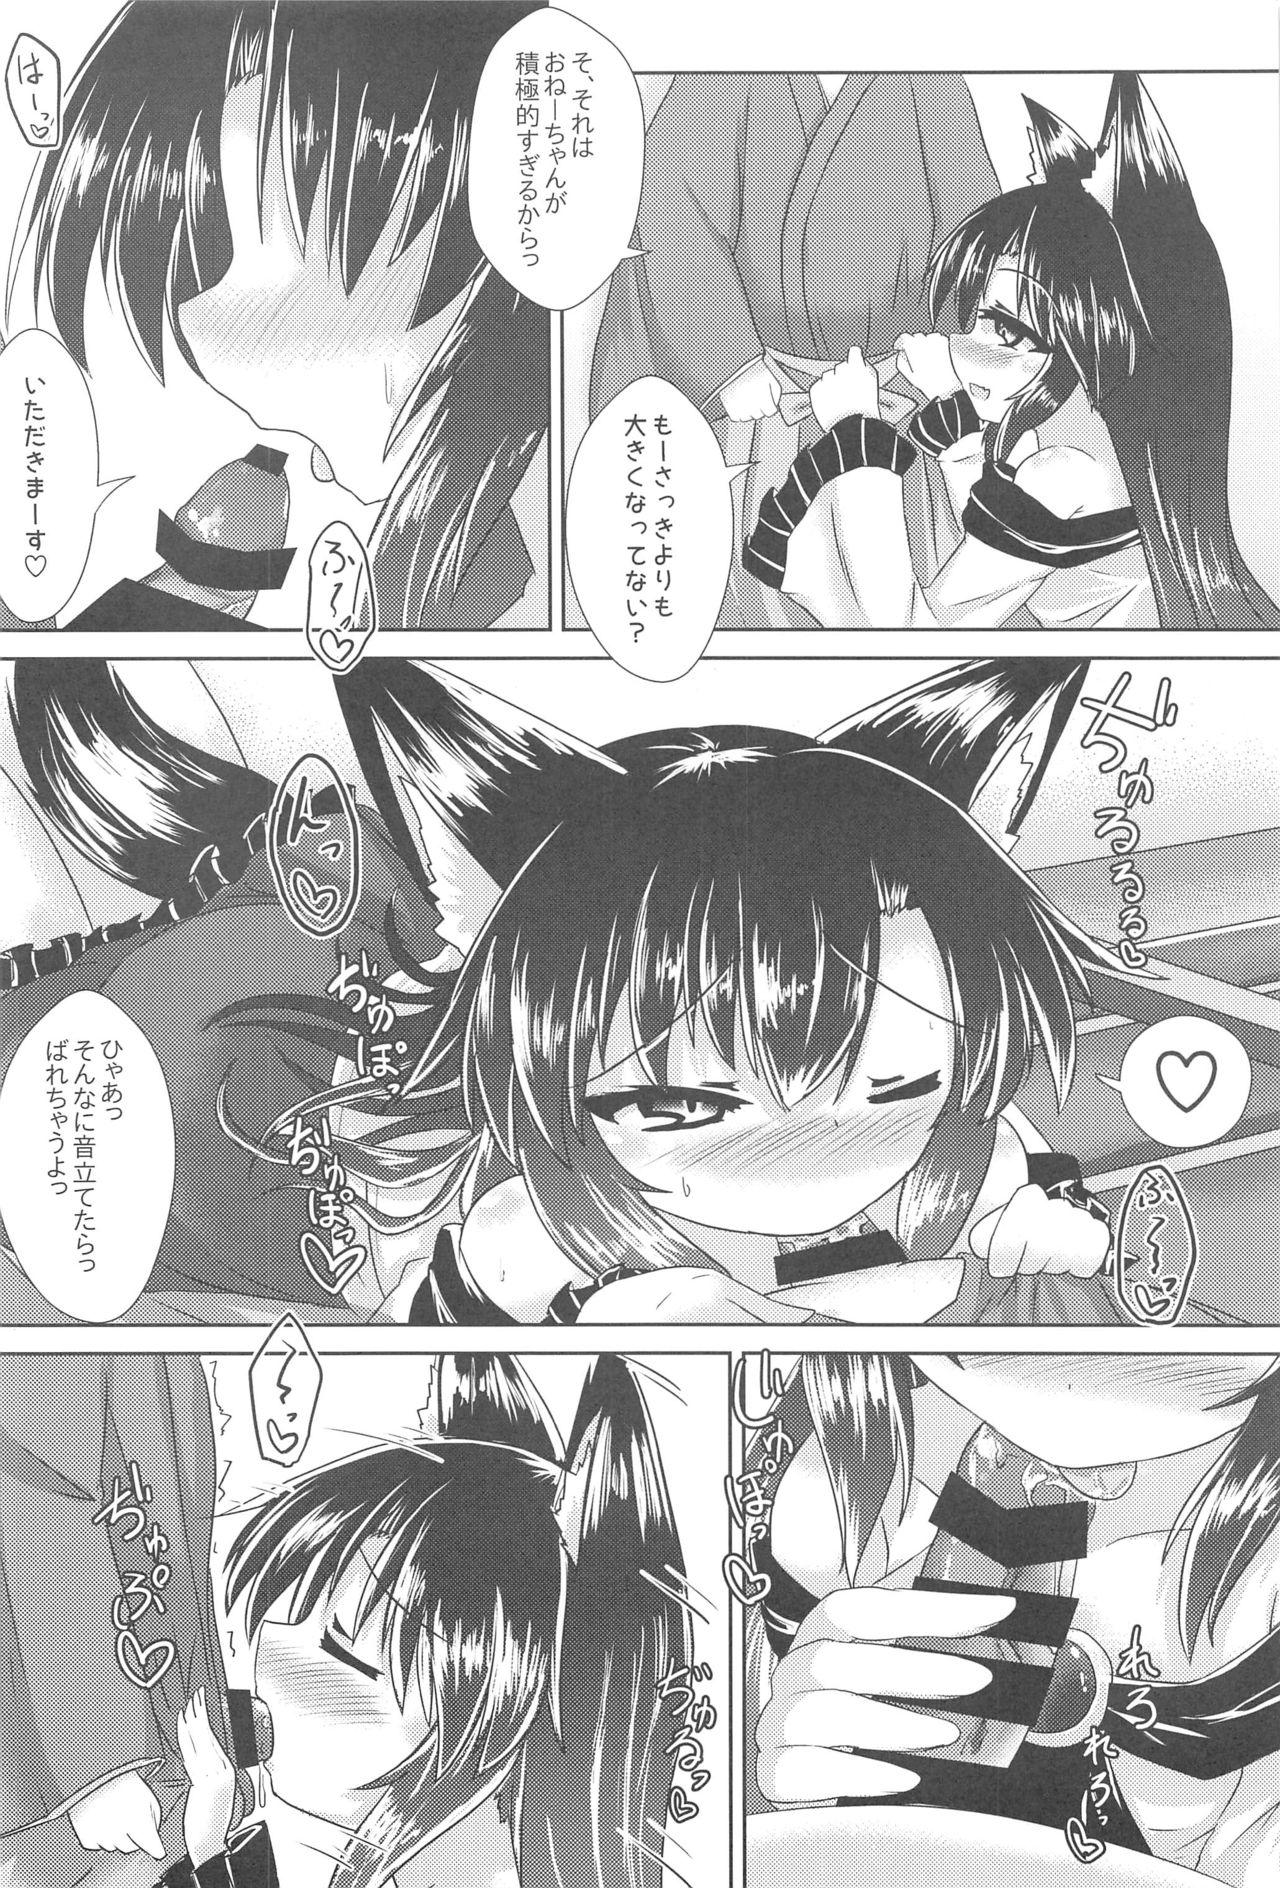 Colombian 路地裏のルーガルー - Touhou project Livecams - Page 7